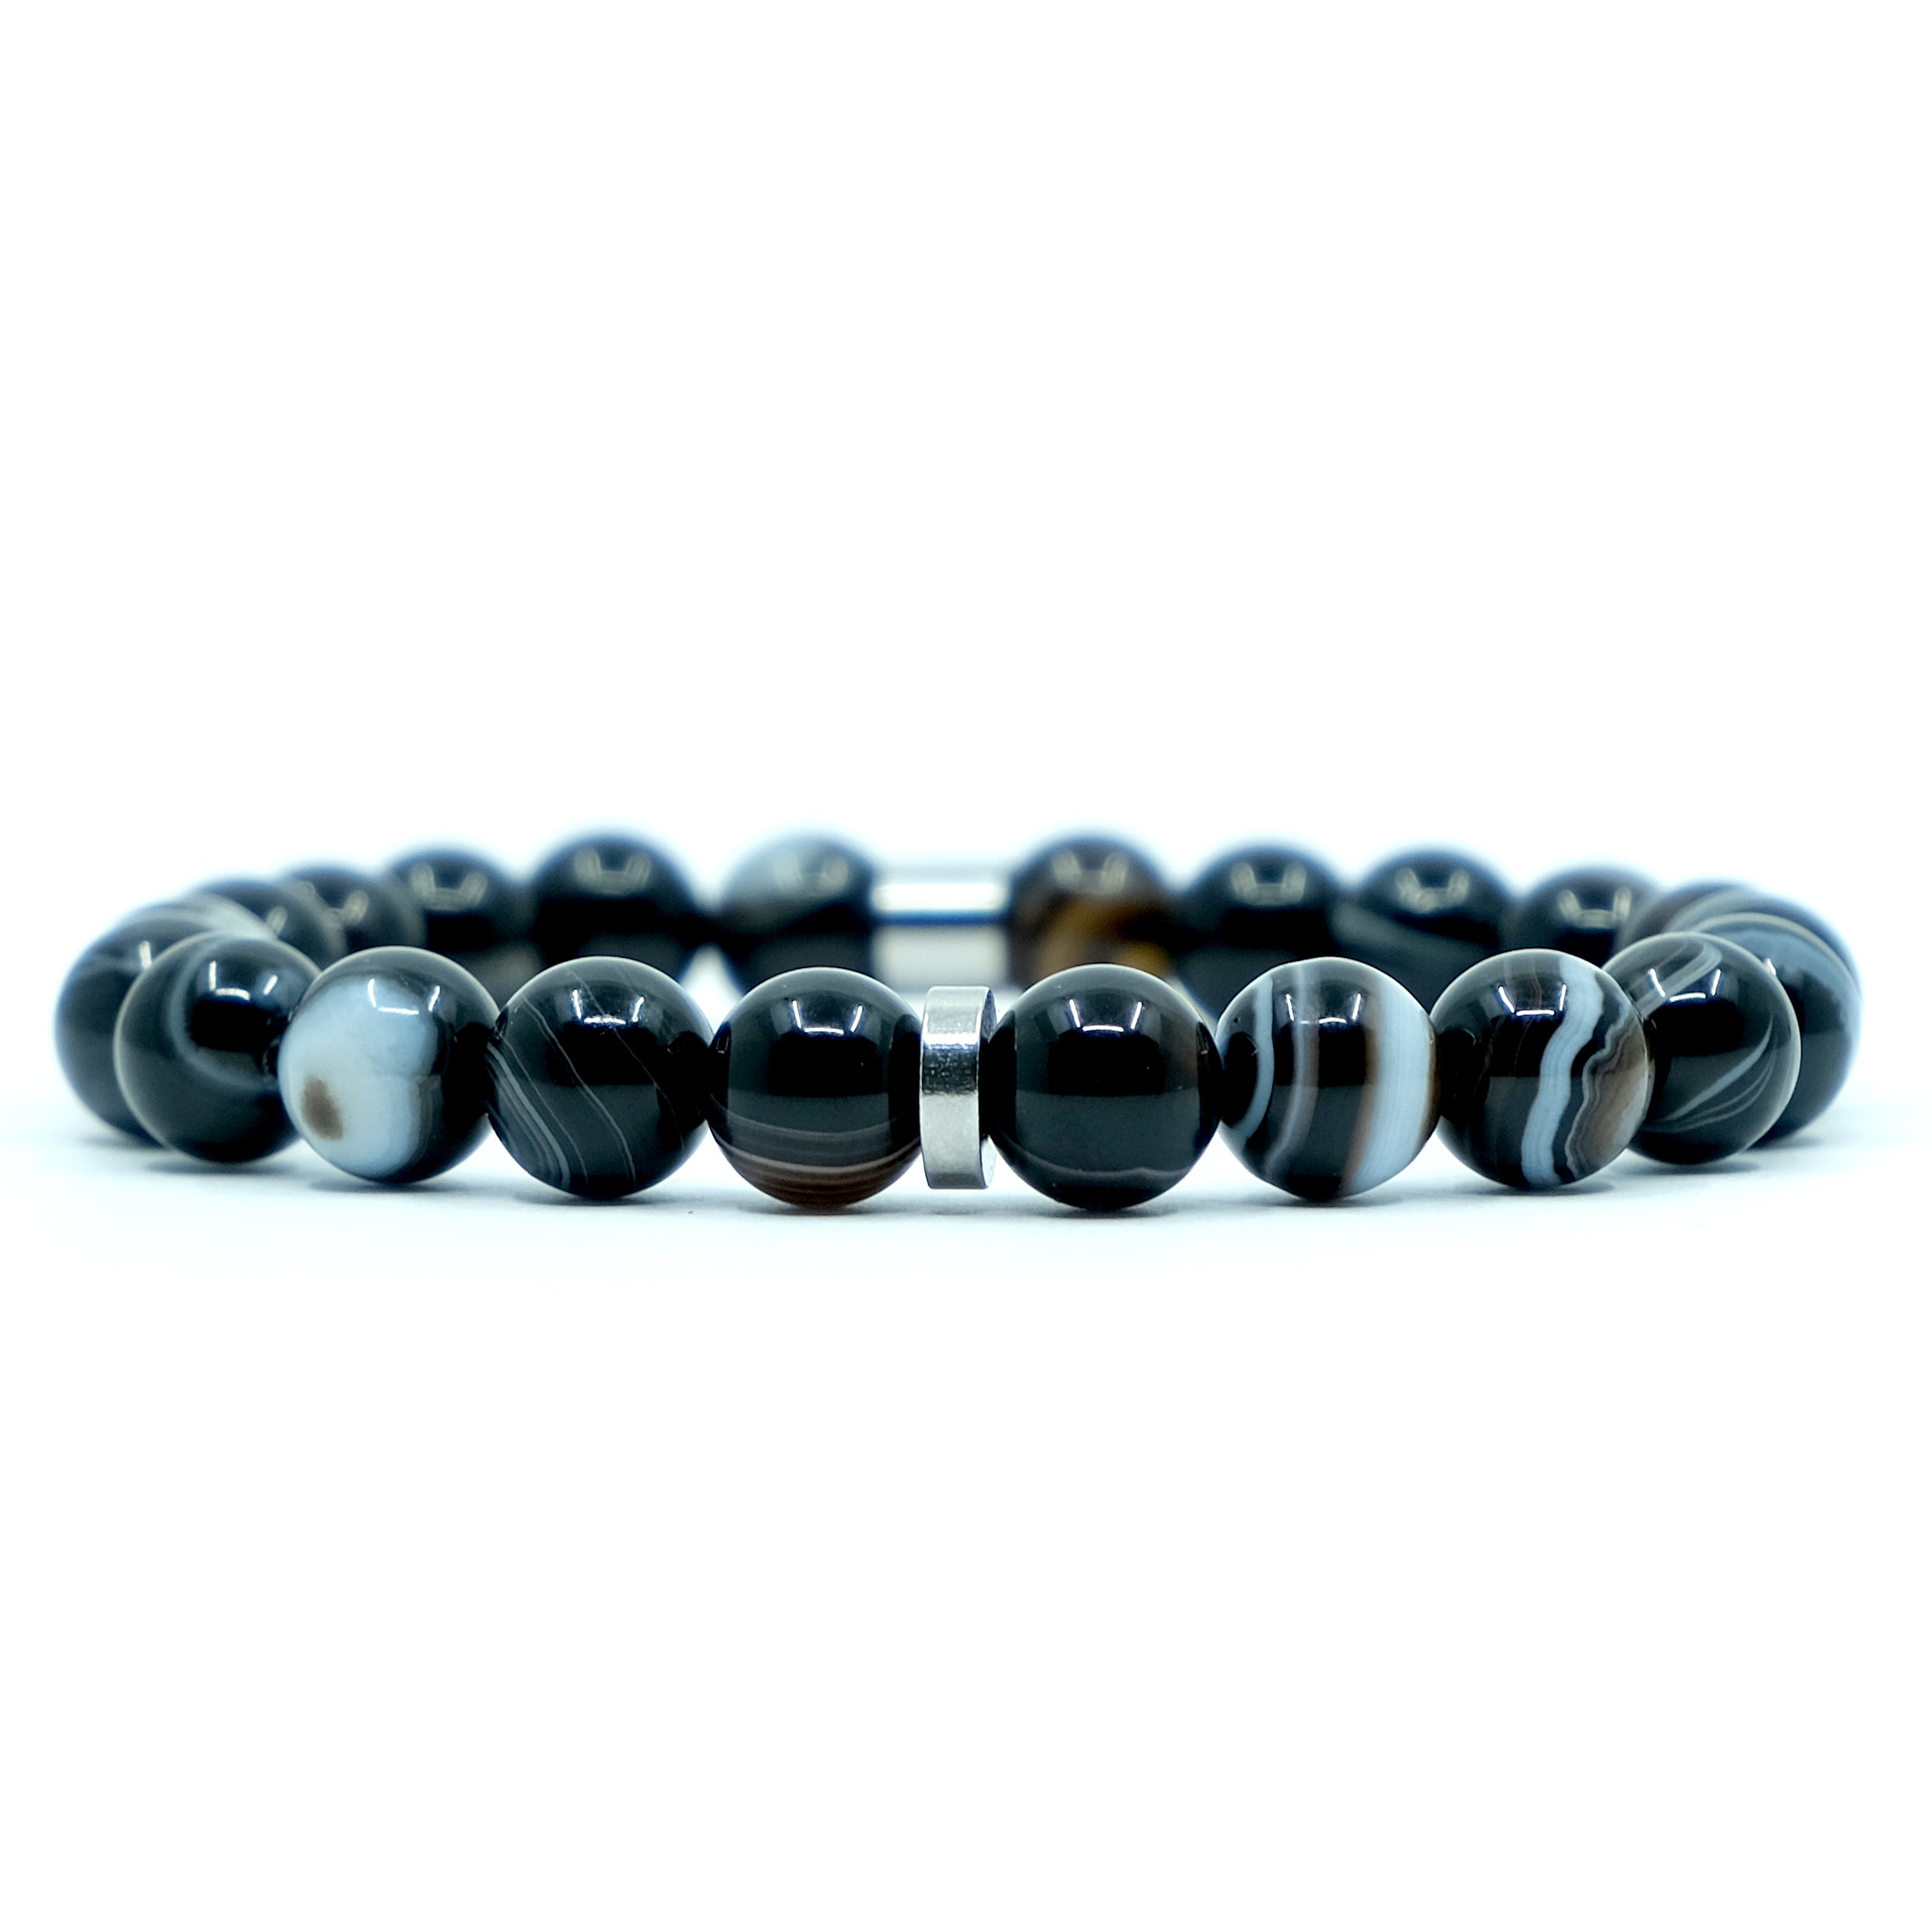 8mm black agate gemstones with stainless steel feature bead